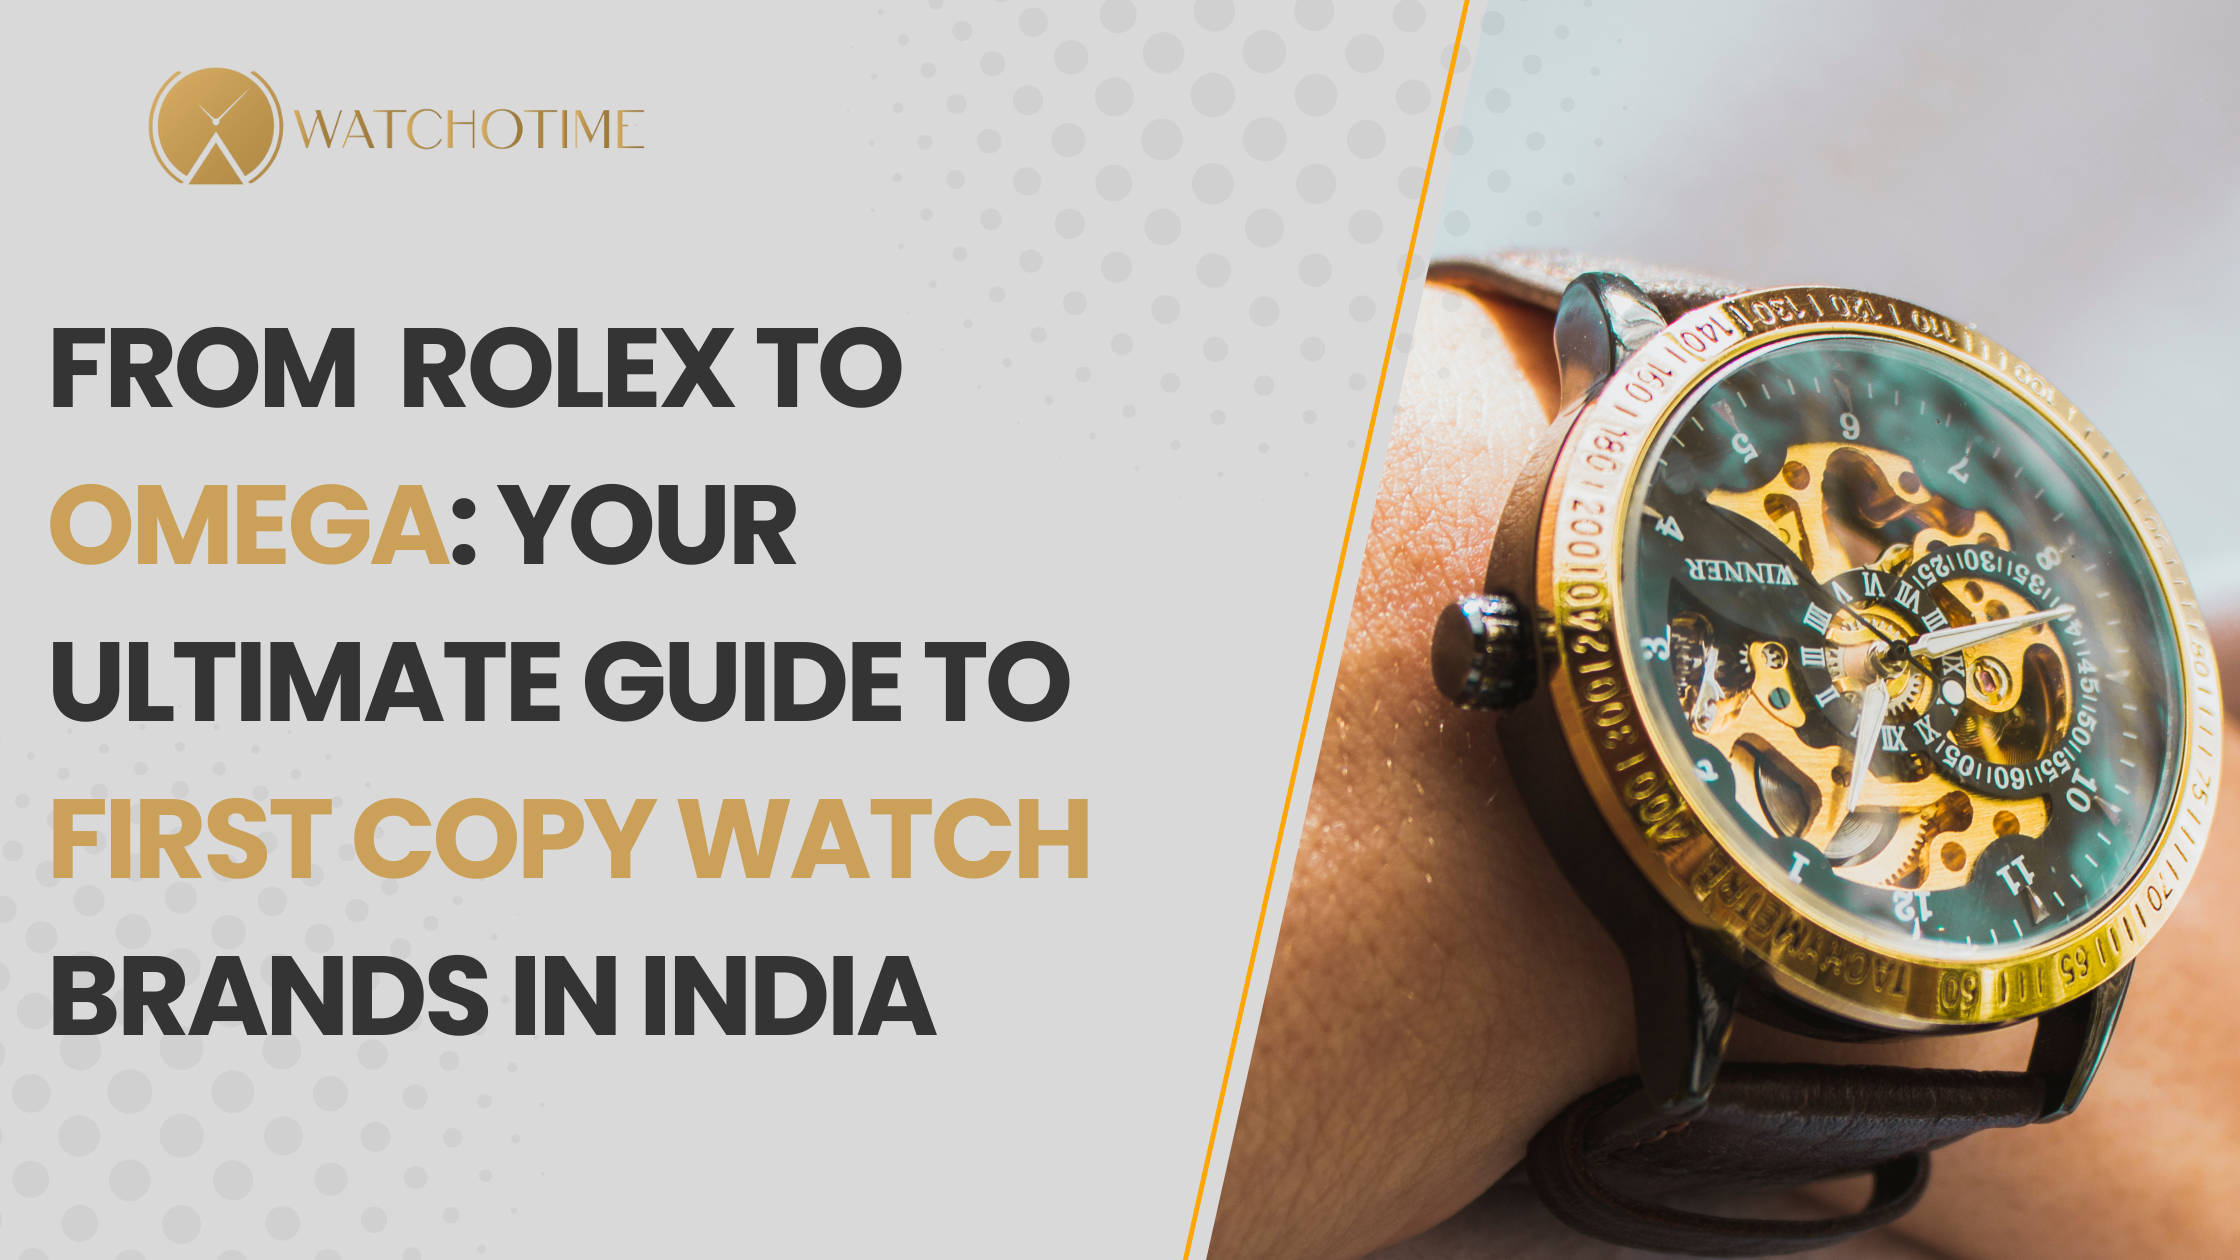 From Rolex to Omega Your Ultimate Guide to First Copy Watch Brands in India.